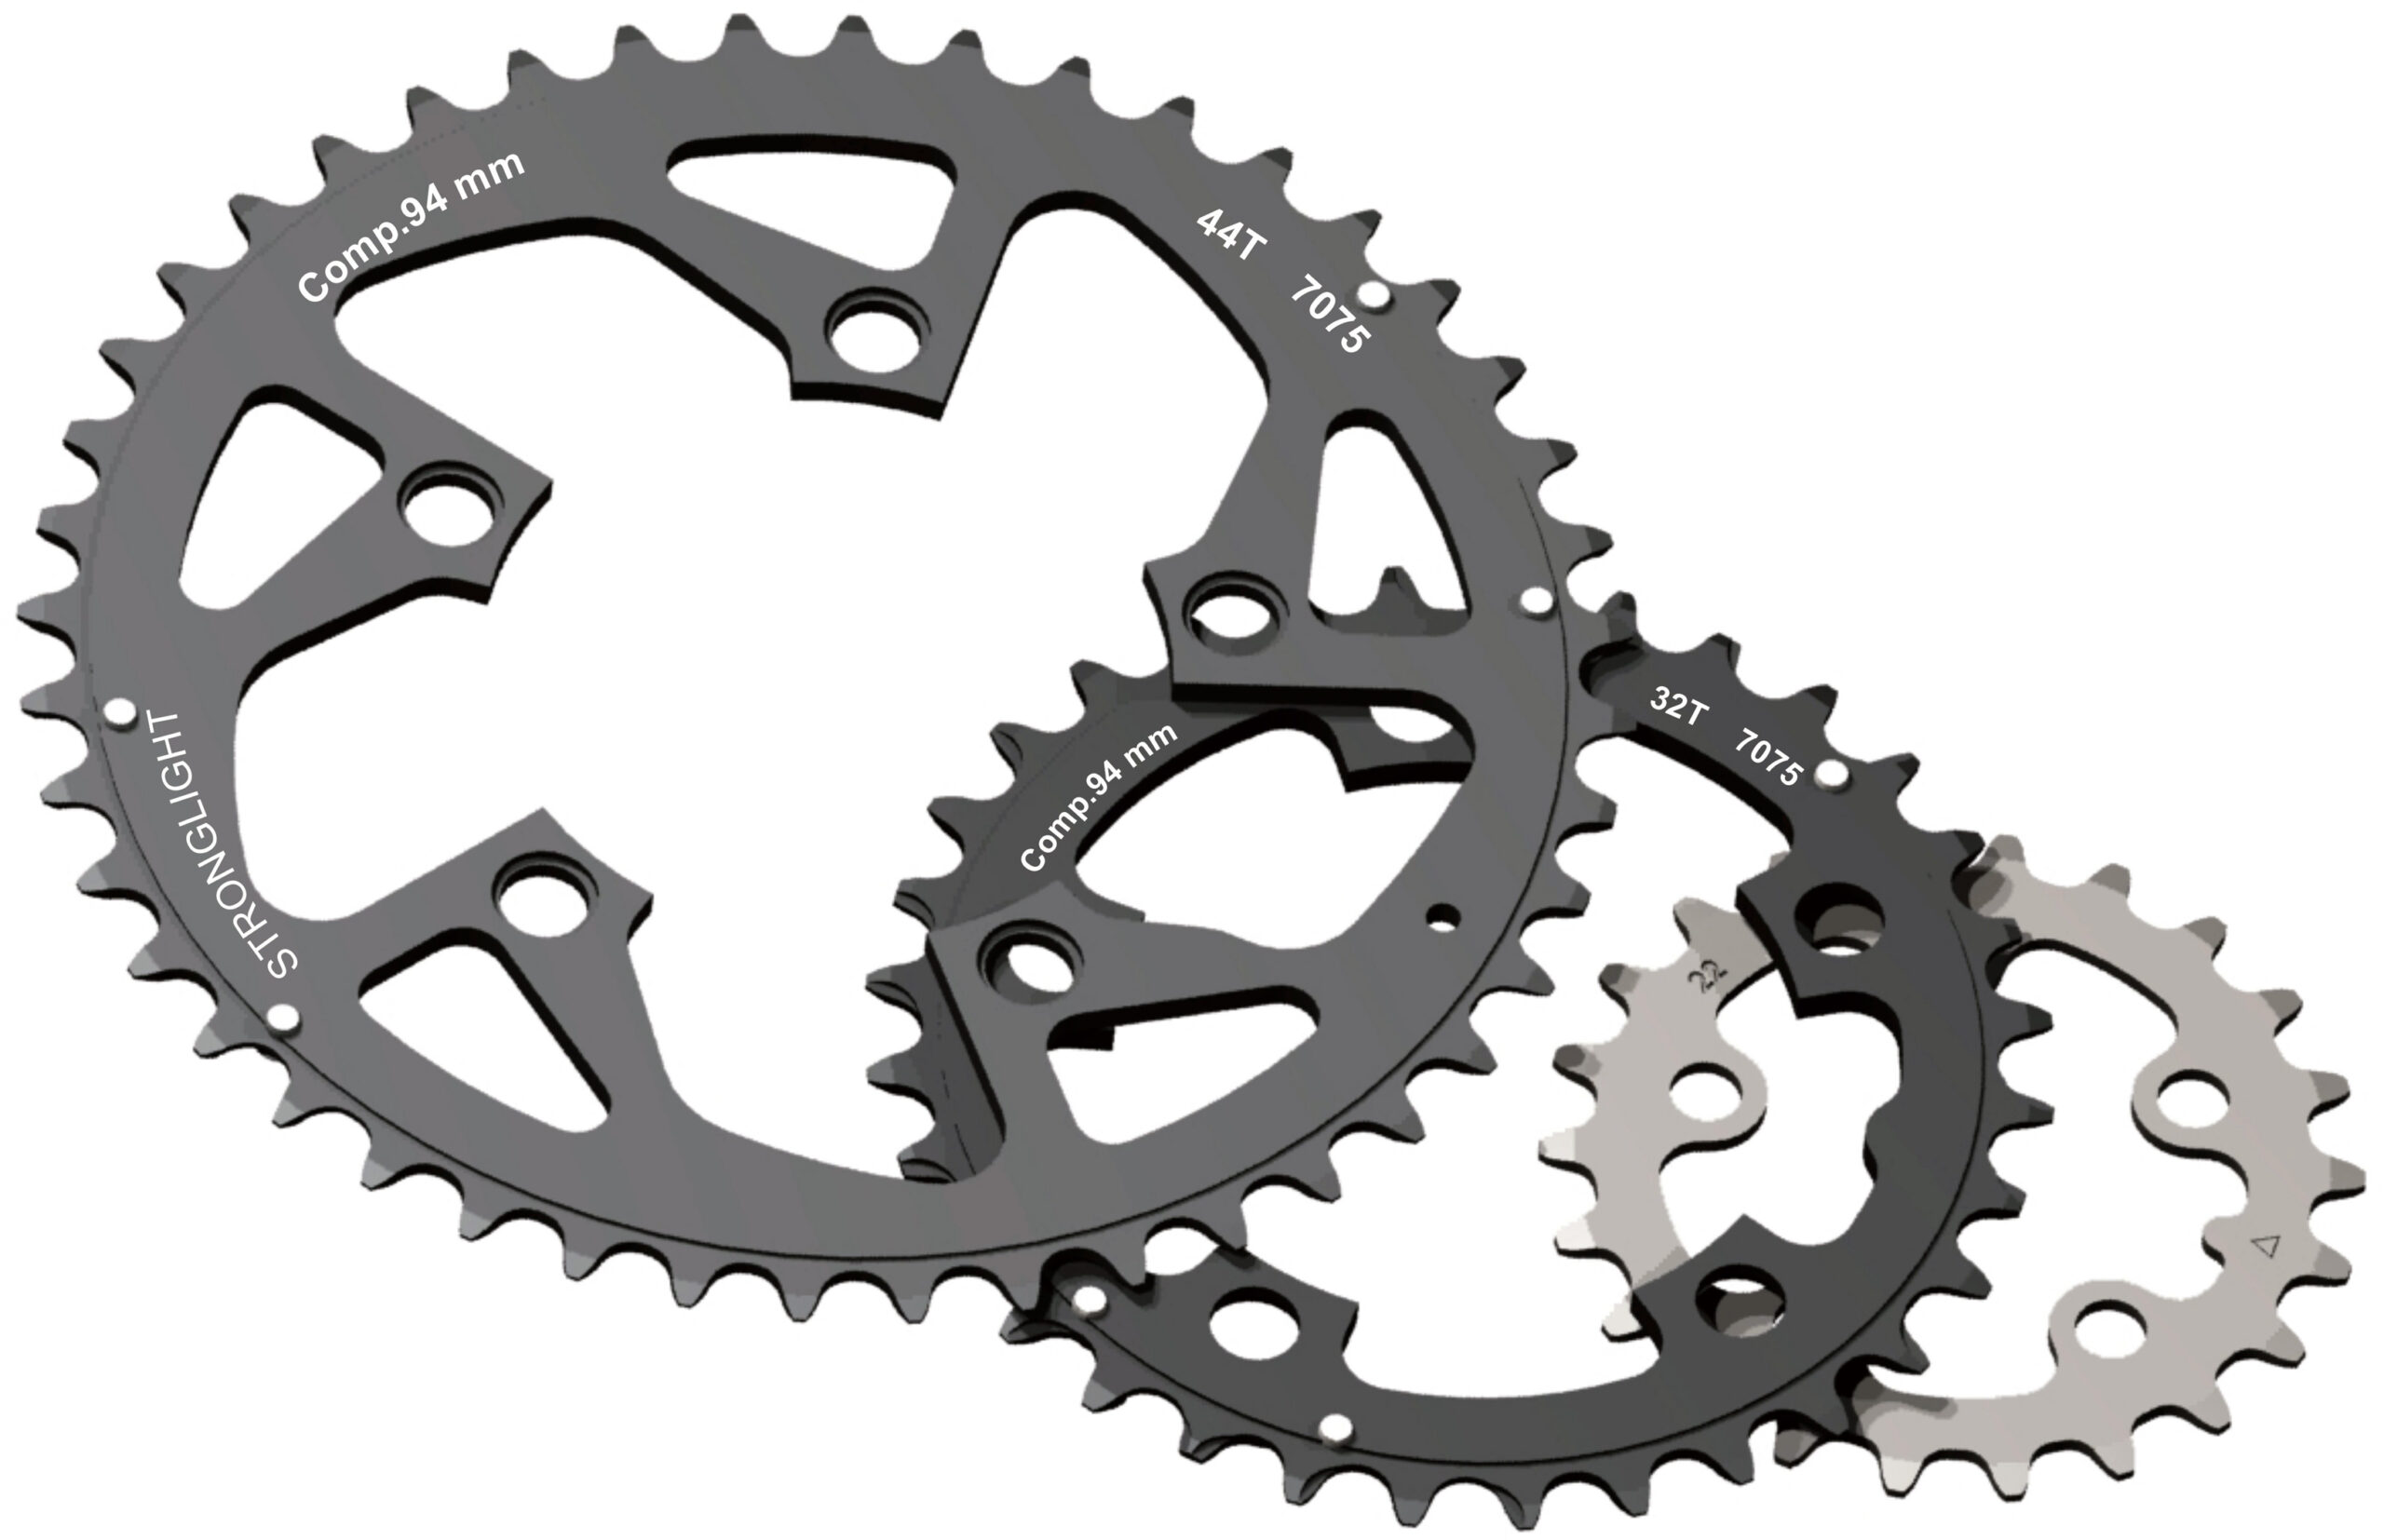 RZ09436Z Stronglight 36T With Pins 5-Arm/94mm Chainring